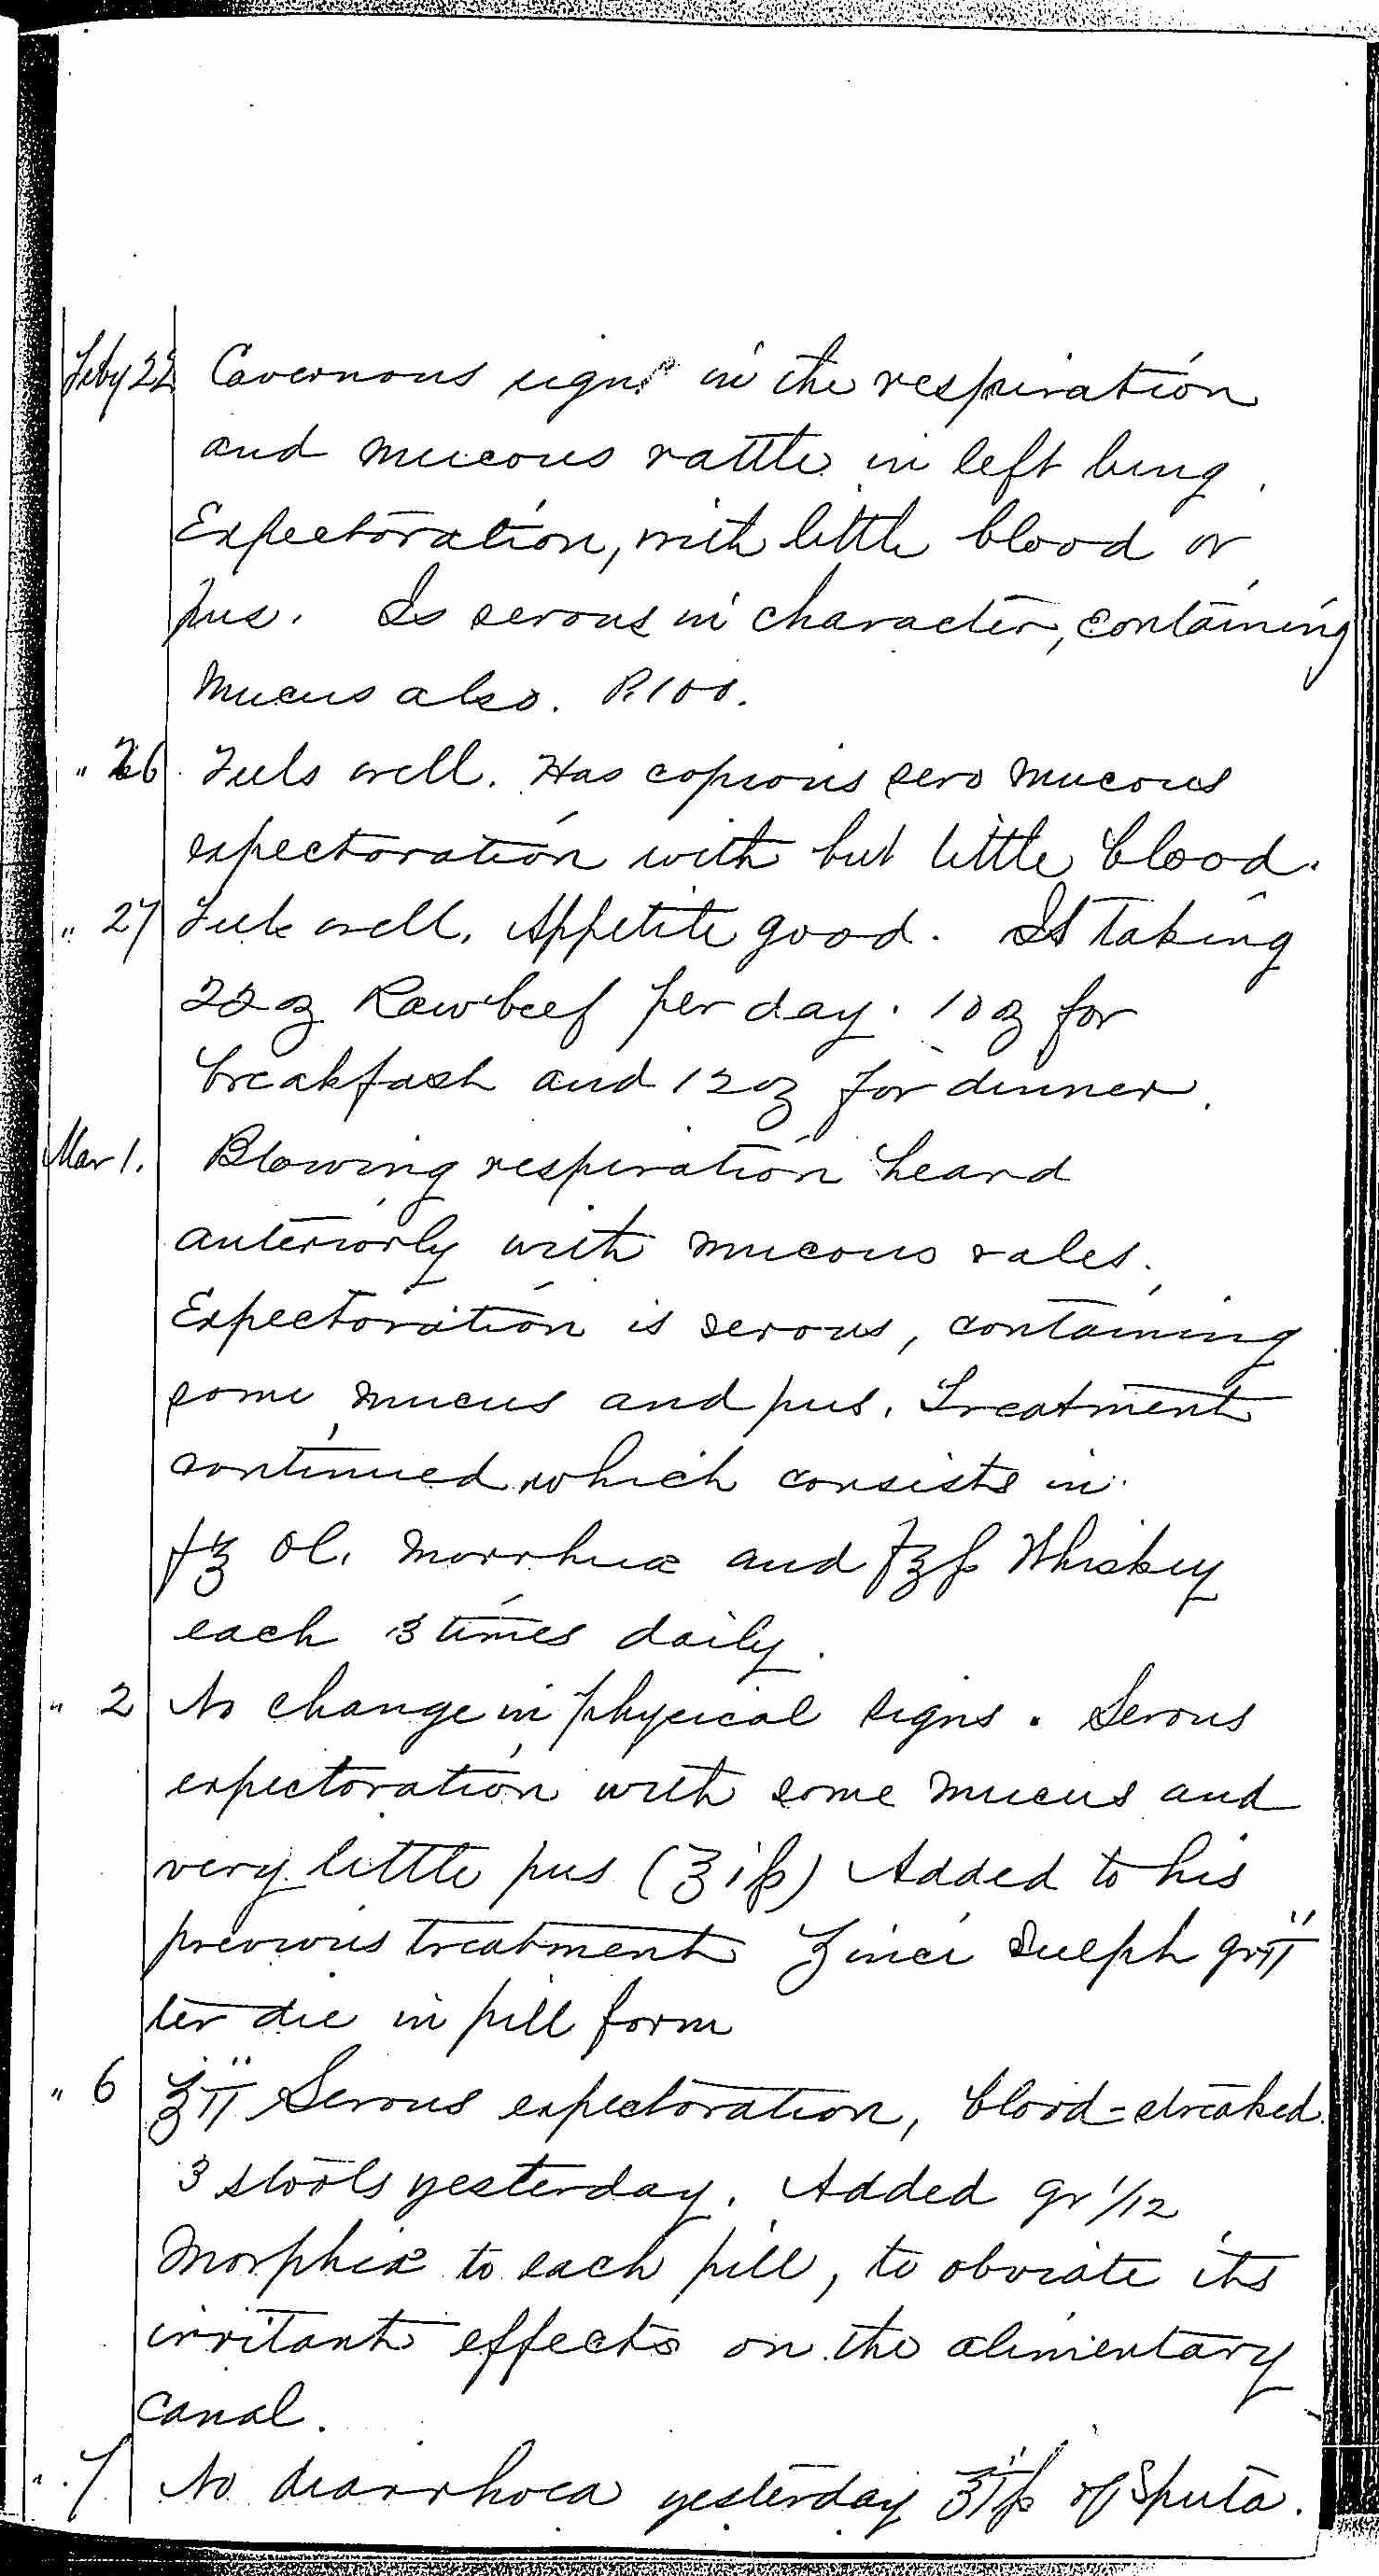 Entry for Bernard Drury (page 25 of 31) in the log Hospital Tickets and Case Papers - Naval Hospital - Washington, D.C. - 1868-69